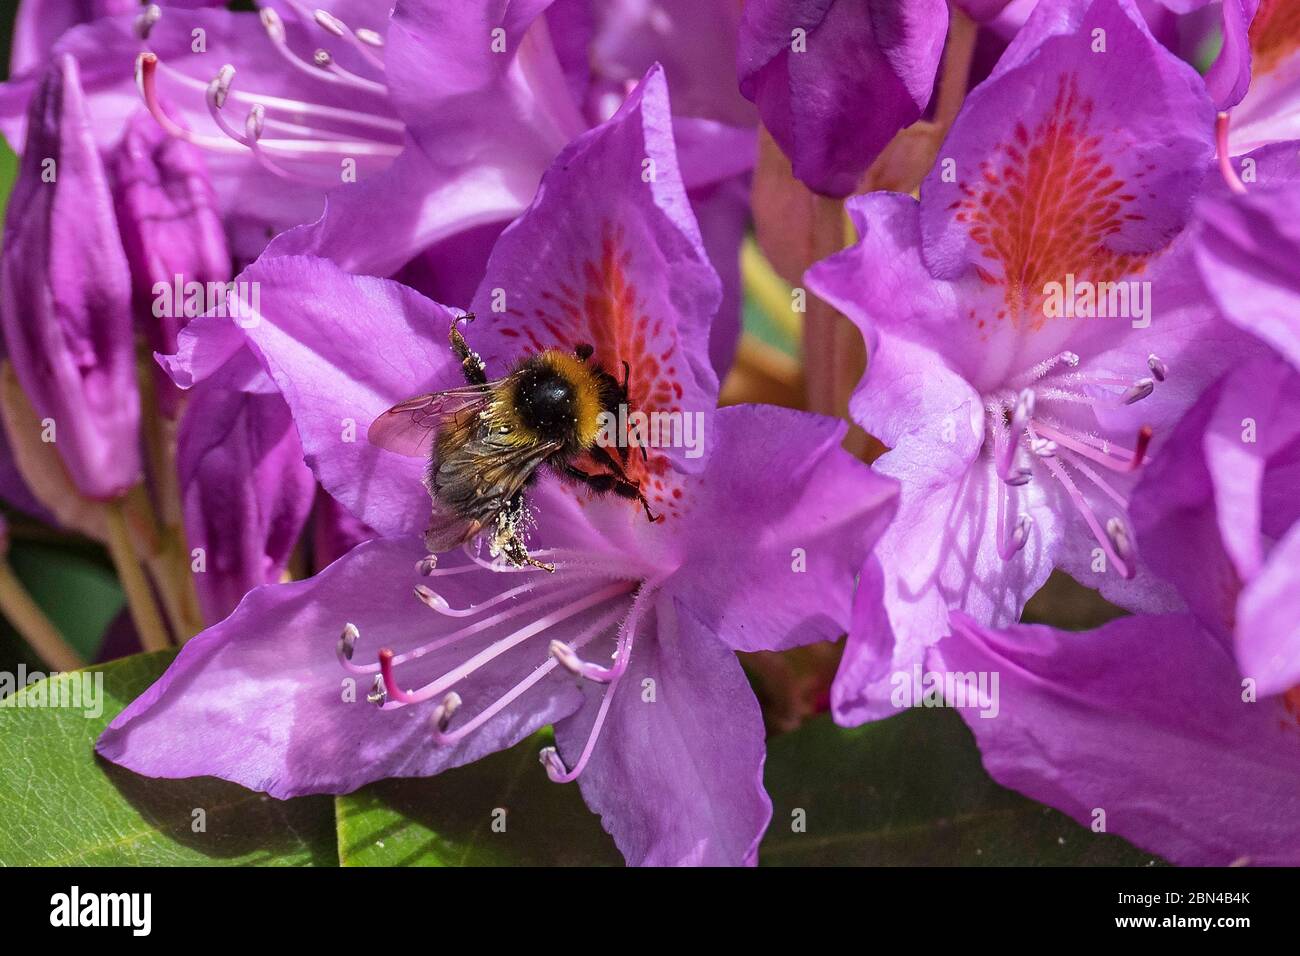 Bumblebee on rhododendron flowers. Stock Photo